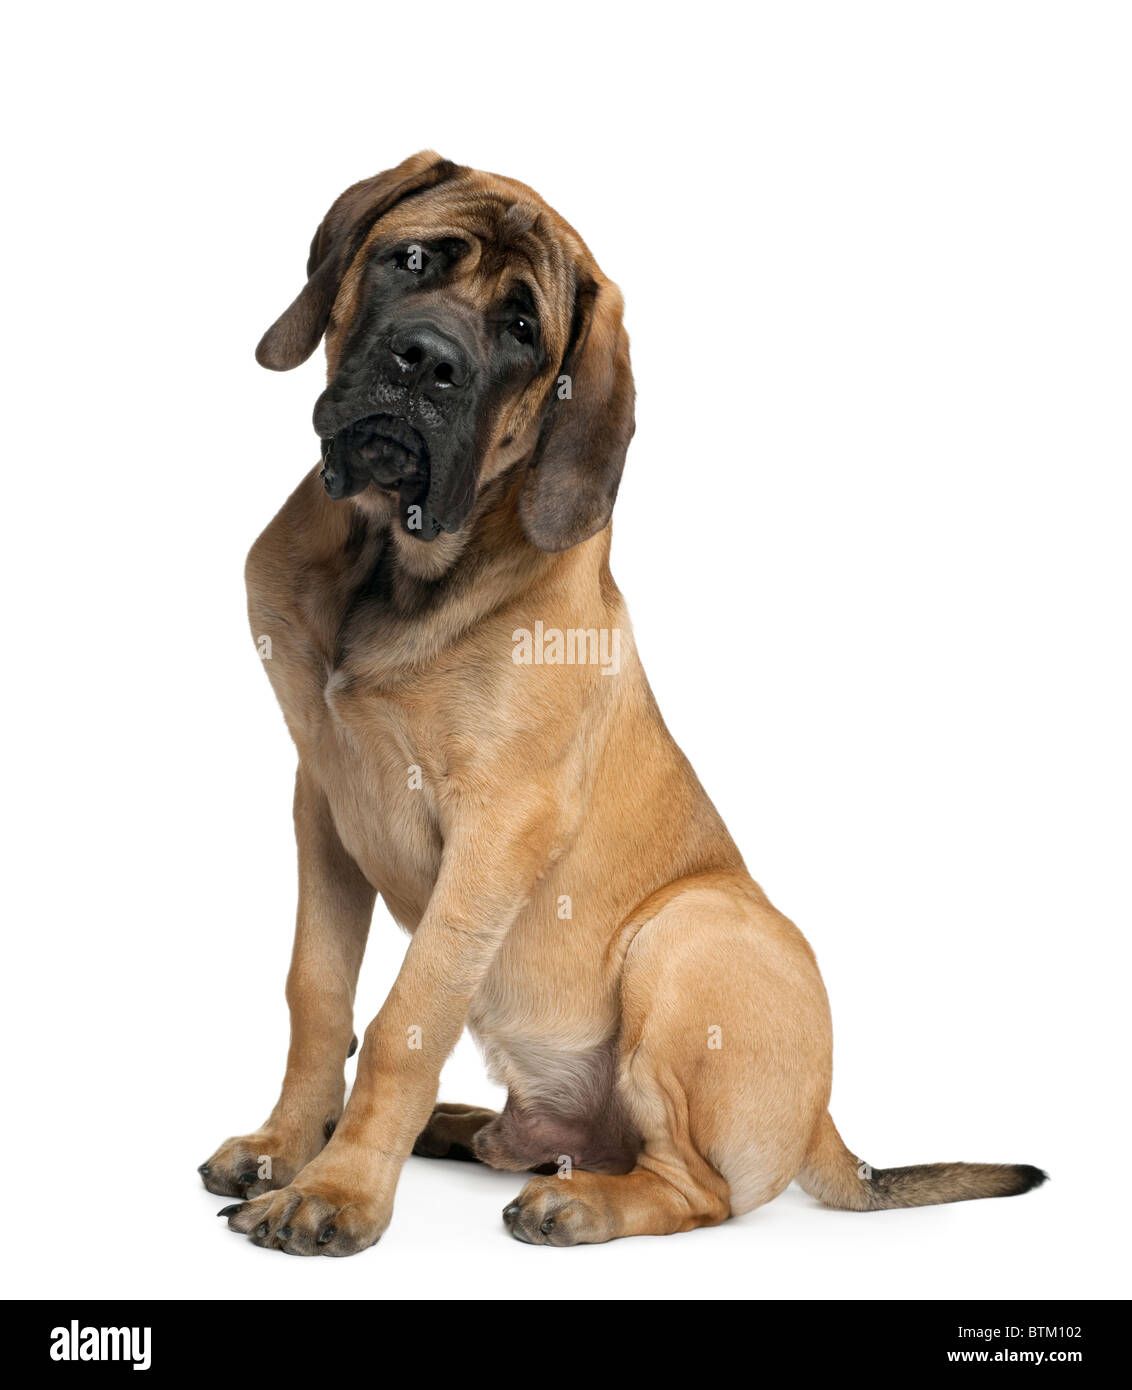 Mastiff, 10 years old, in front of white background Banque D'Images